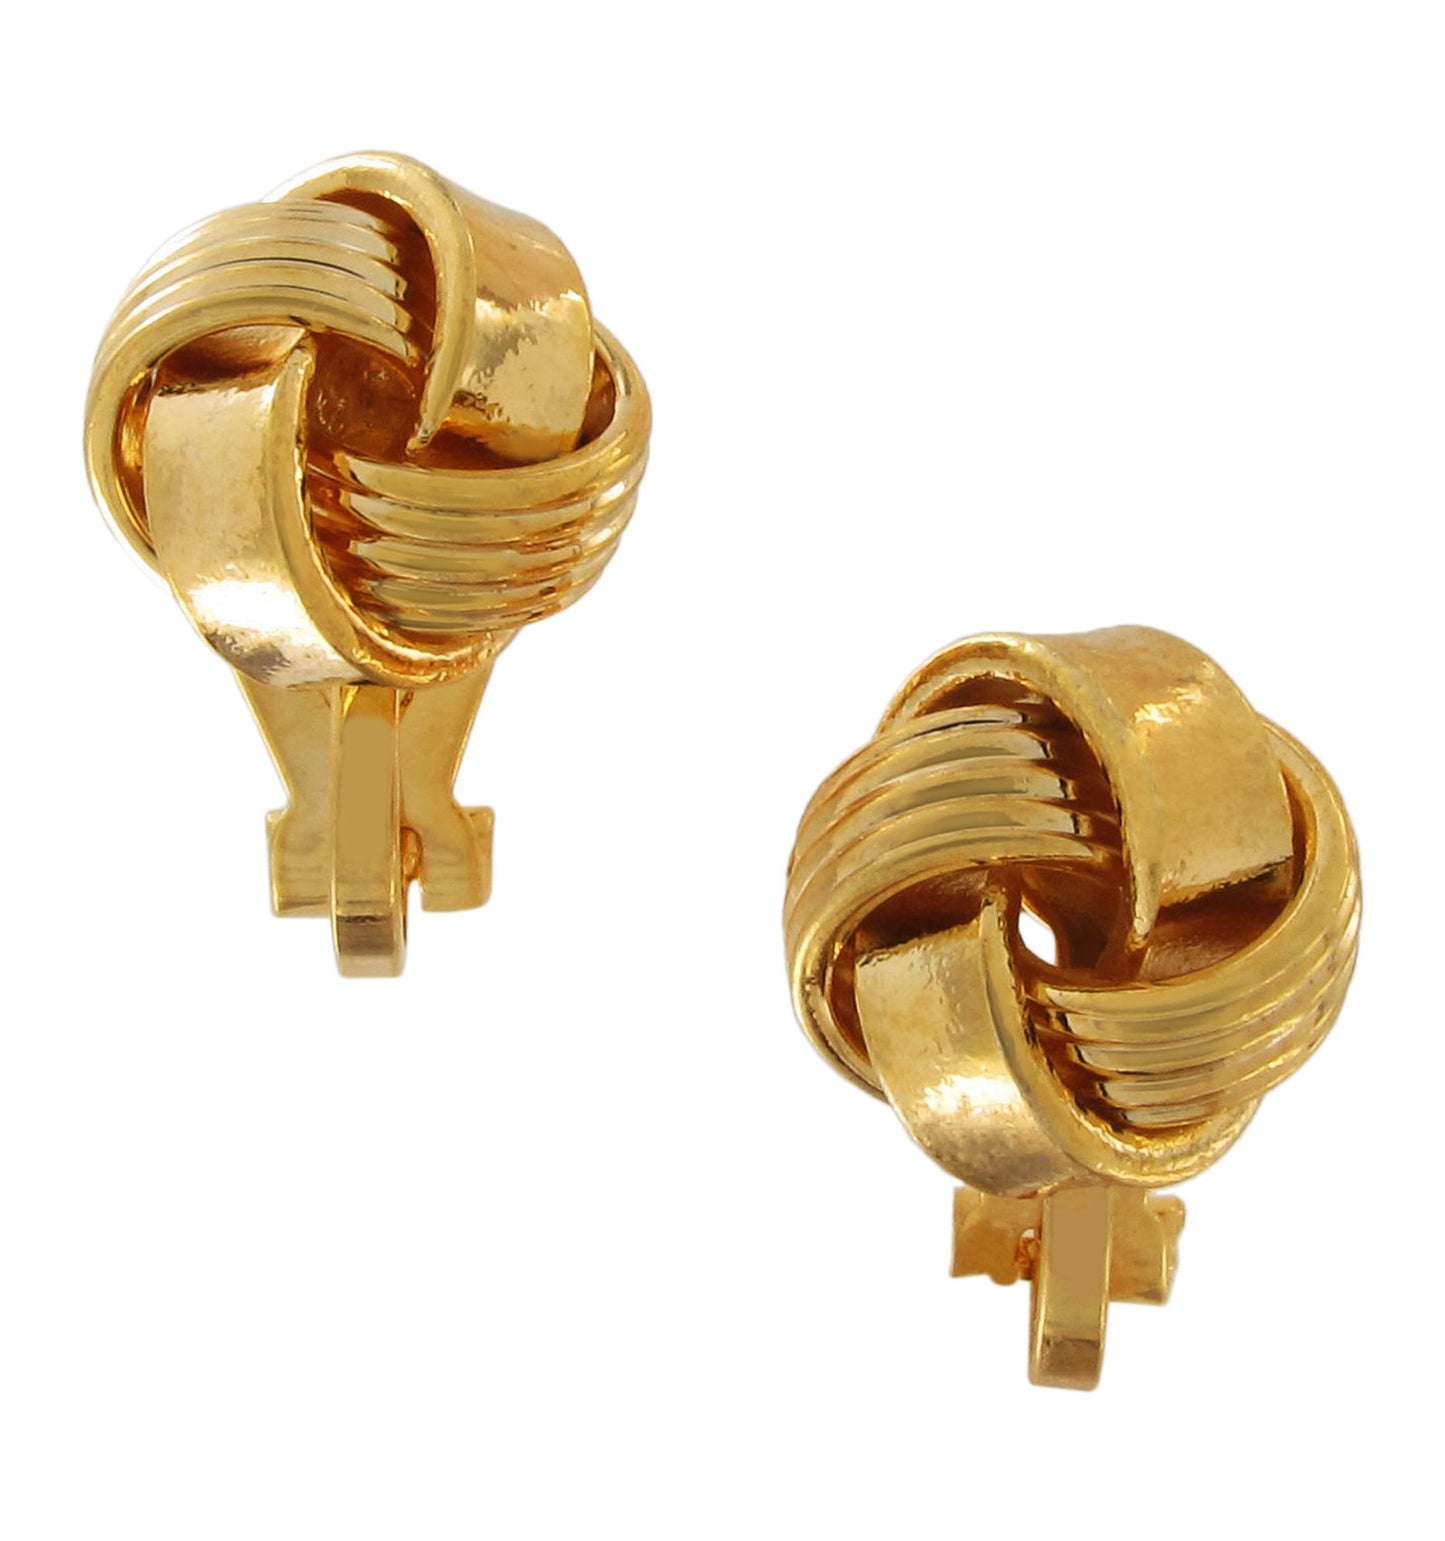 Gold Tone Spiral Striped Twisted Knot Clip Earrings Small